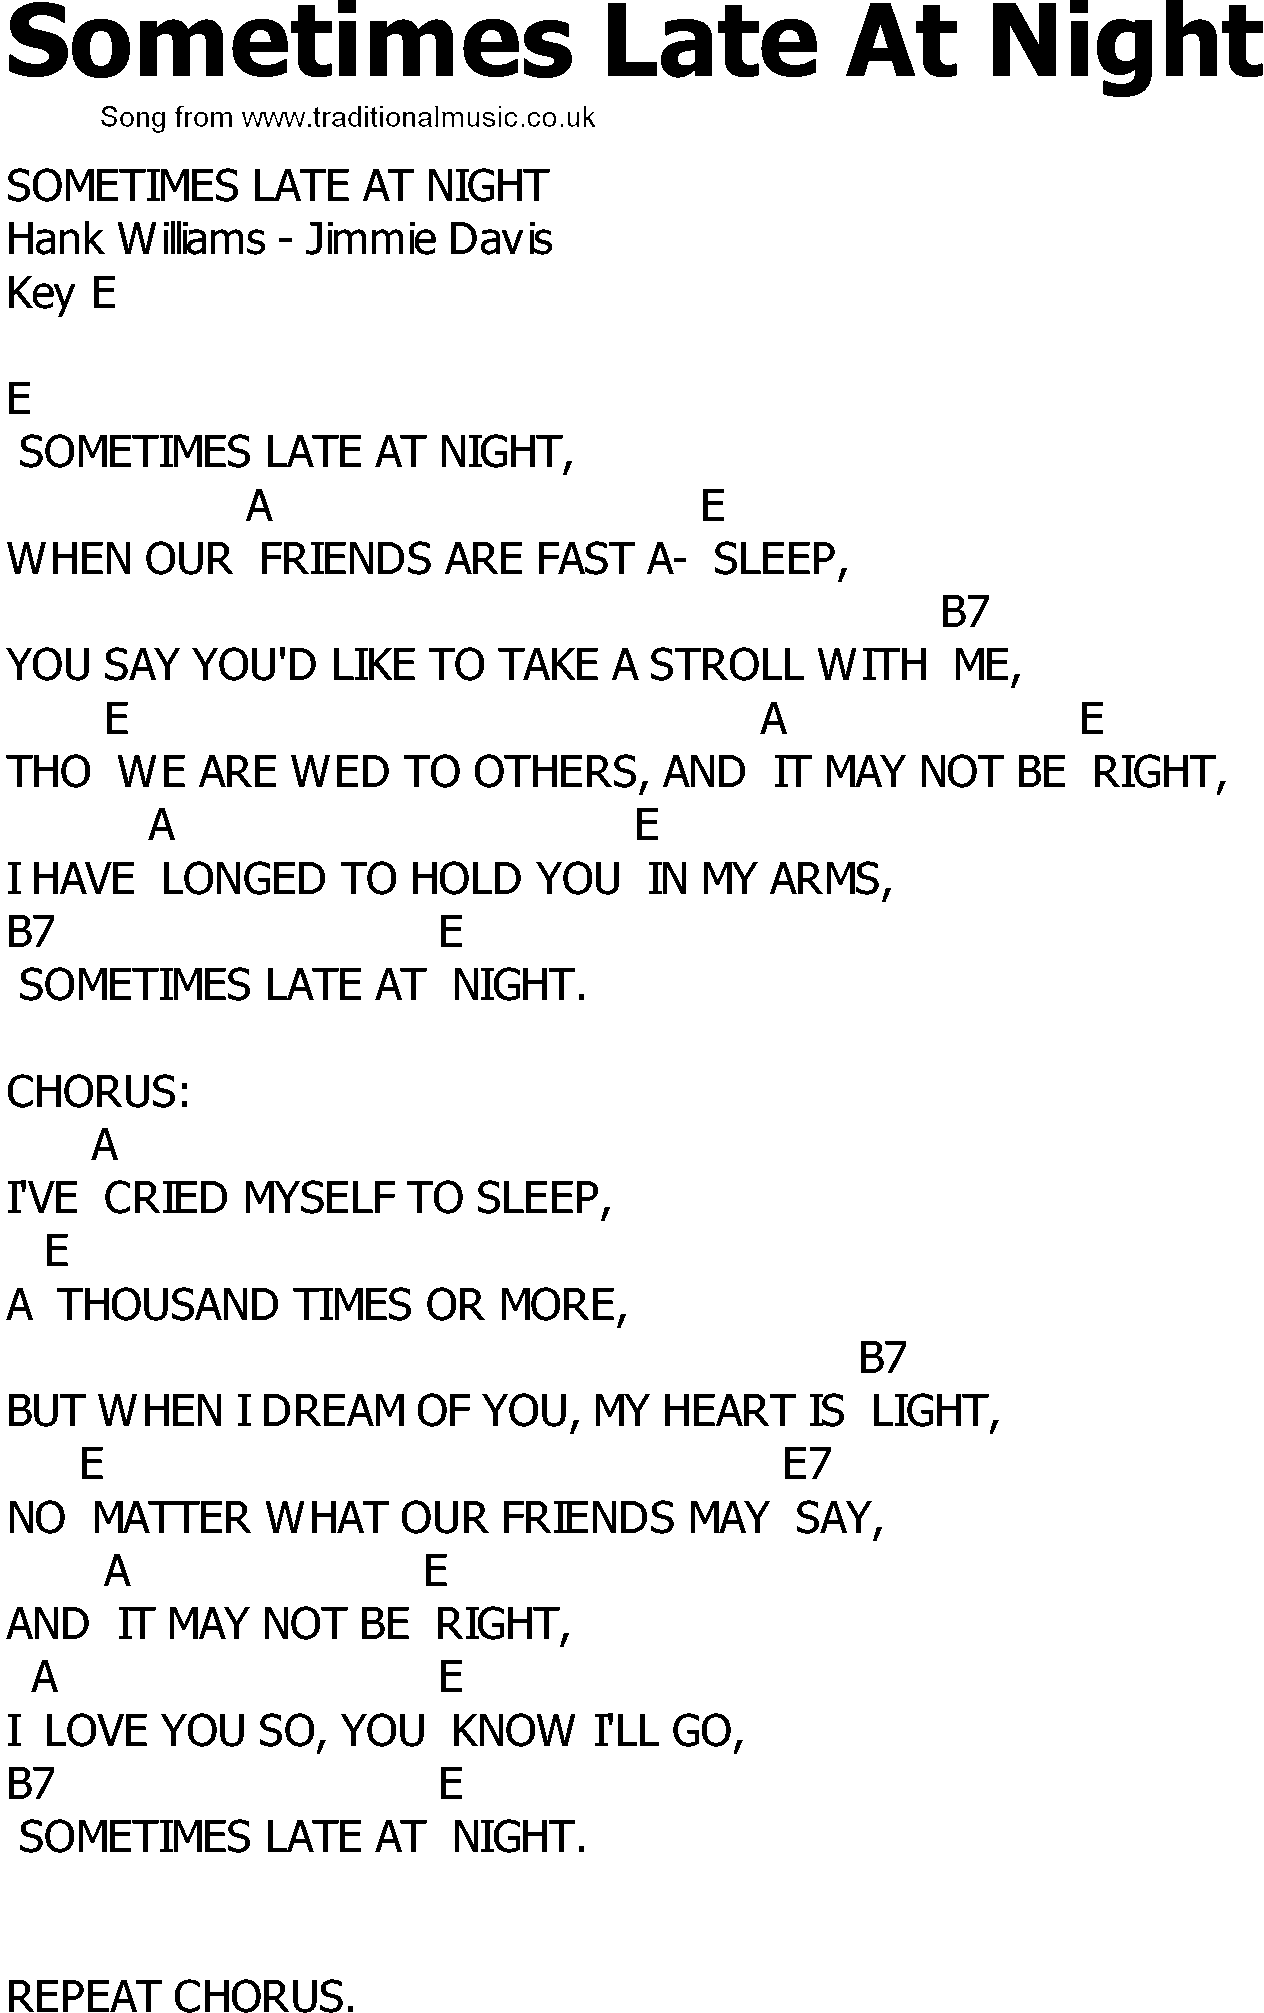 Old Country song lyrics with chords - Sometimes Late At Night